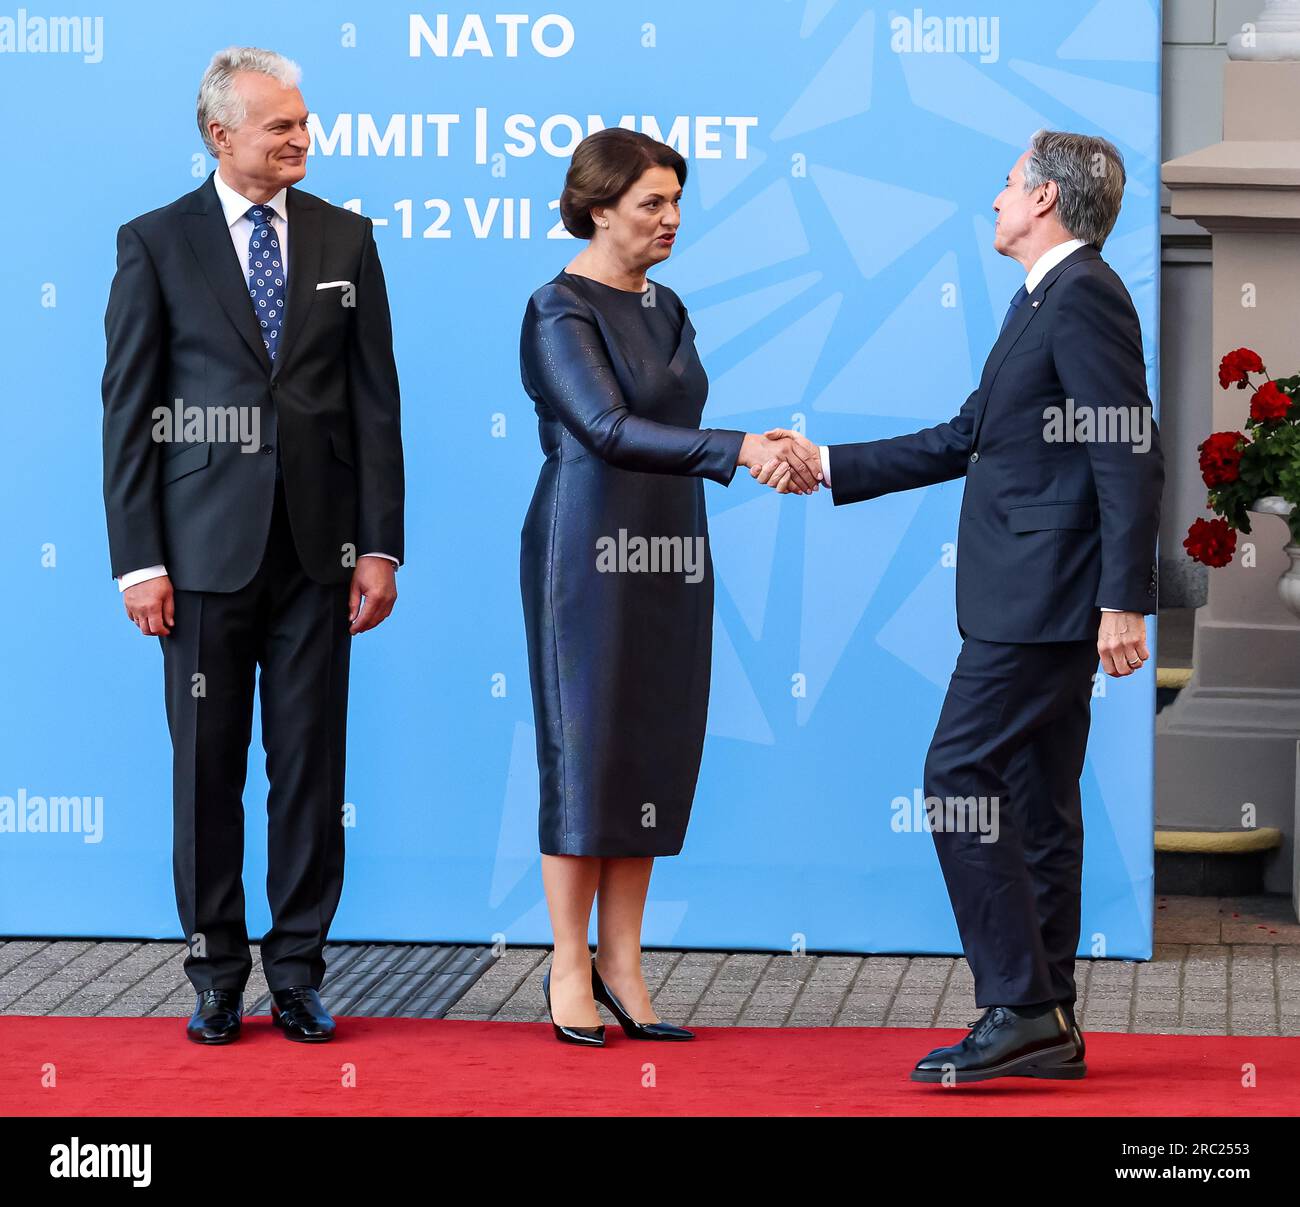 Vilnius, Lithuania. 11th July, 2023. President of Lithuania, Gitanas Naus?da (L) and his wife Diana Naus?dien? (C) welcome United States Secretary of State, Antony Blinken (R) as he arrives for a social dinner during the high level NATO summit. The President of Lithuania hosts the dinner for world leaders at the Presidential Palace. The summit agenda covers Ukraine's bid to join the organisation, the accession process of Sweden, boosting arms stockpiles and reviewing plans. Credit: SOPA Images Limited/Alamy Live News Stock Photo